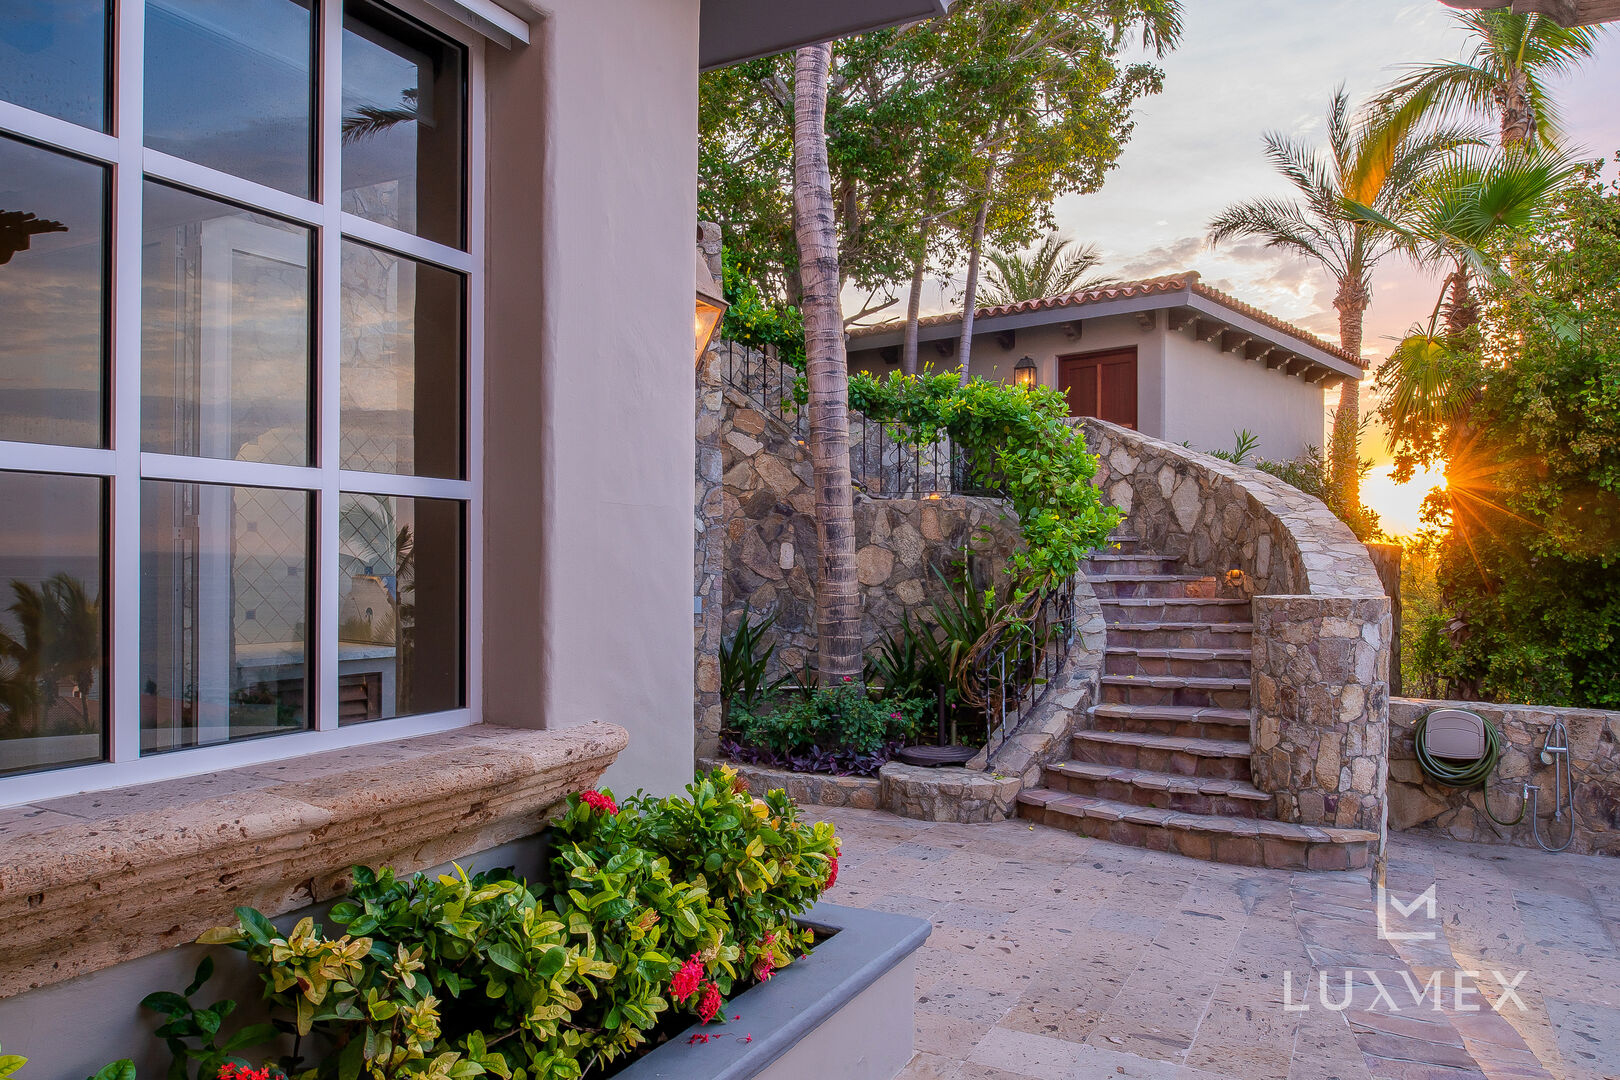 An entrance into the Los Cabos Luxury Vacation Villa; a stairway surrounded by tropical flora.